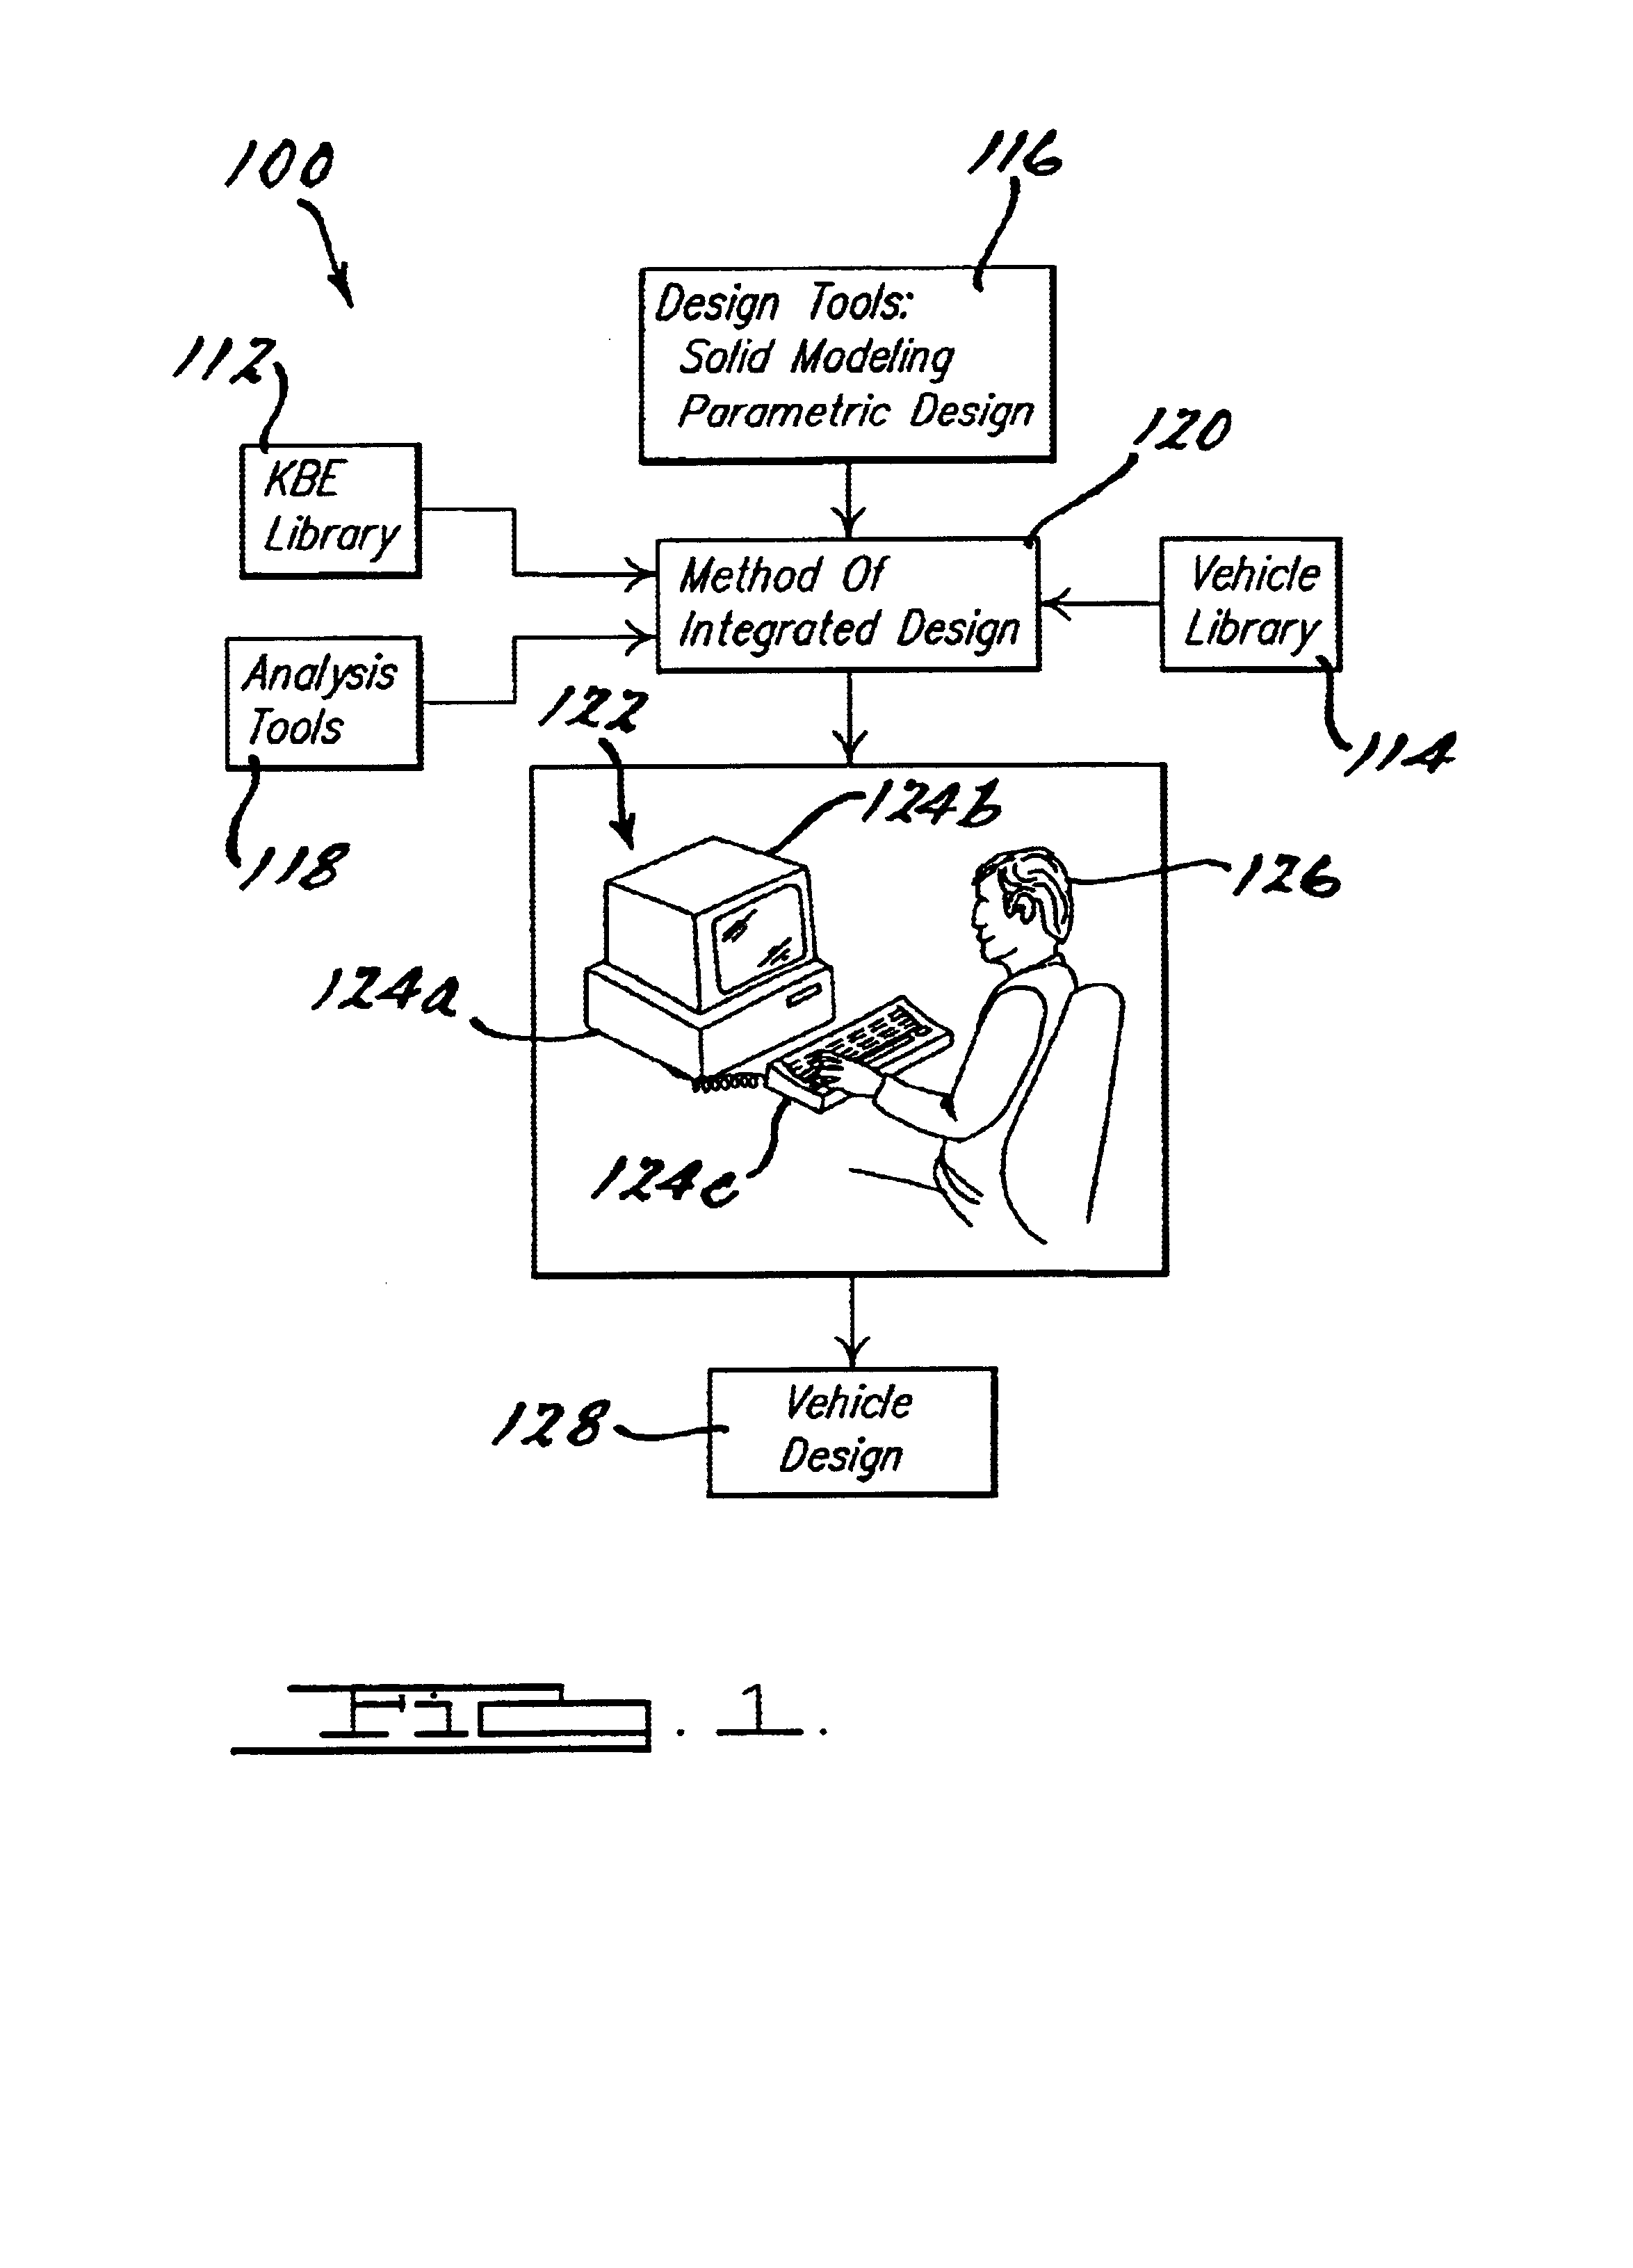 Method of integrating computer visualization for the design of a vehicle